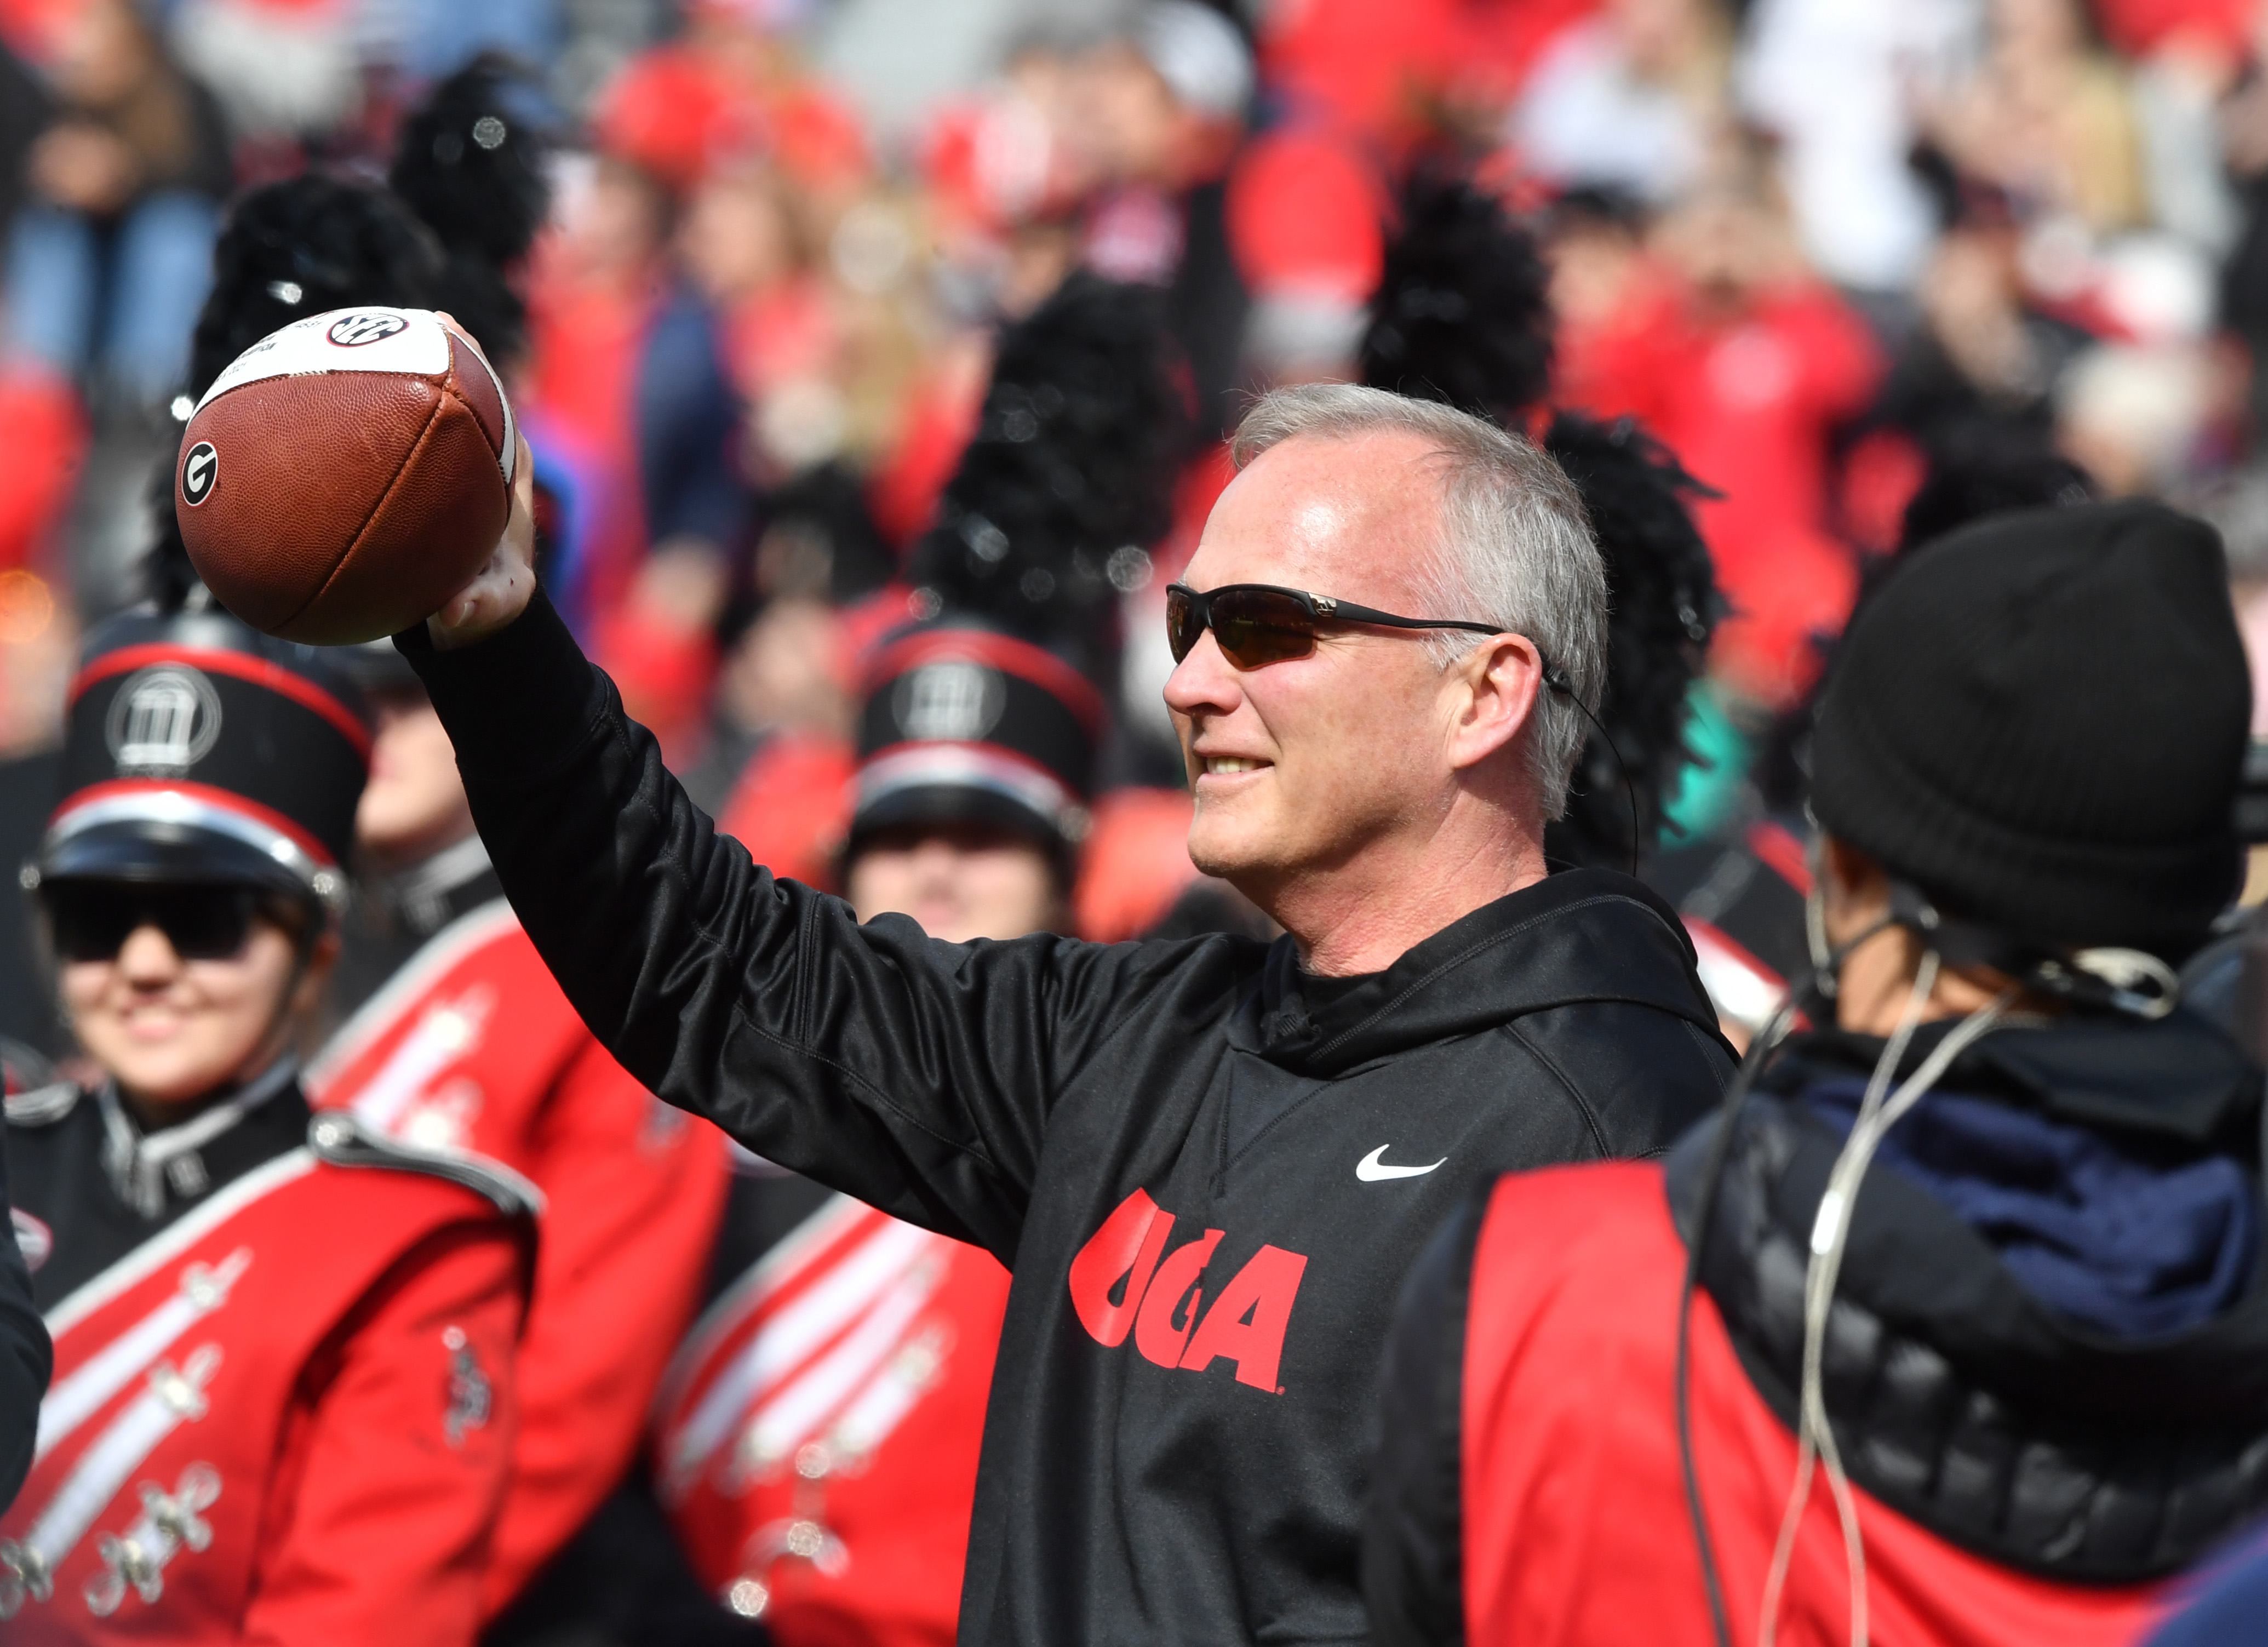 Former Georgia coach Mark Richt tabbed for Hall of Fame induction